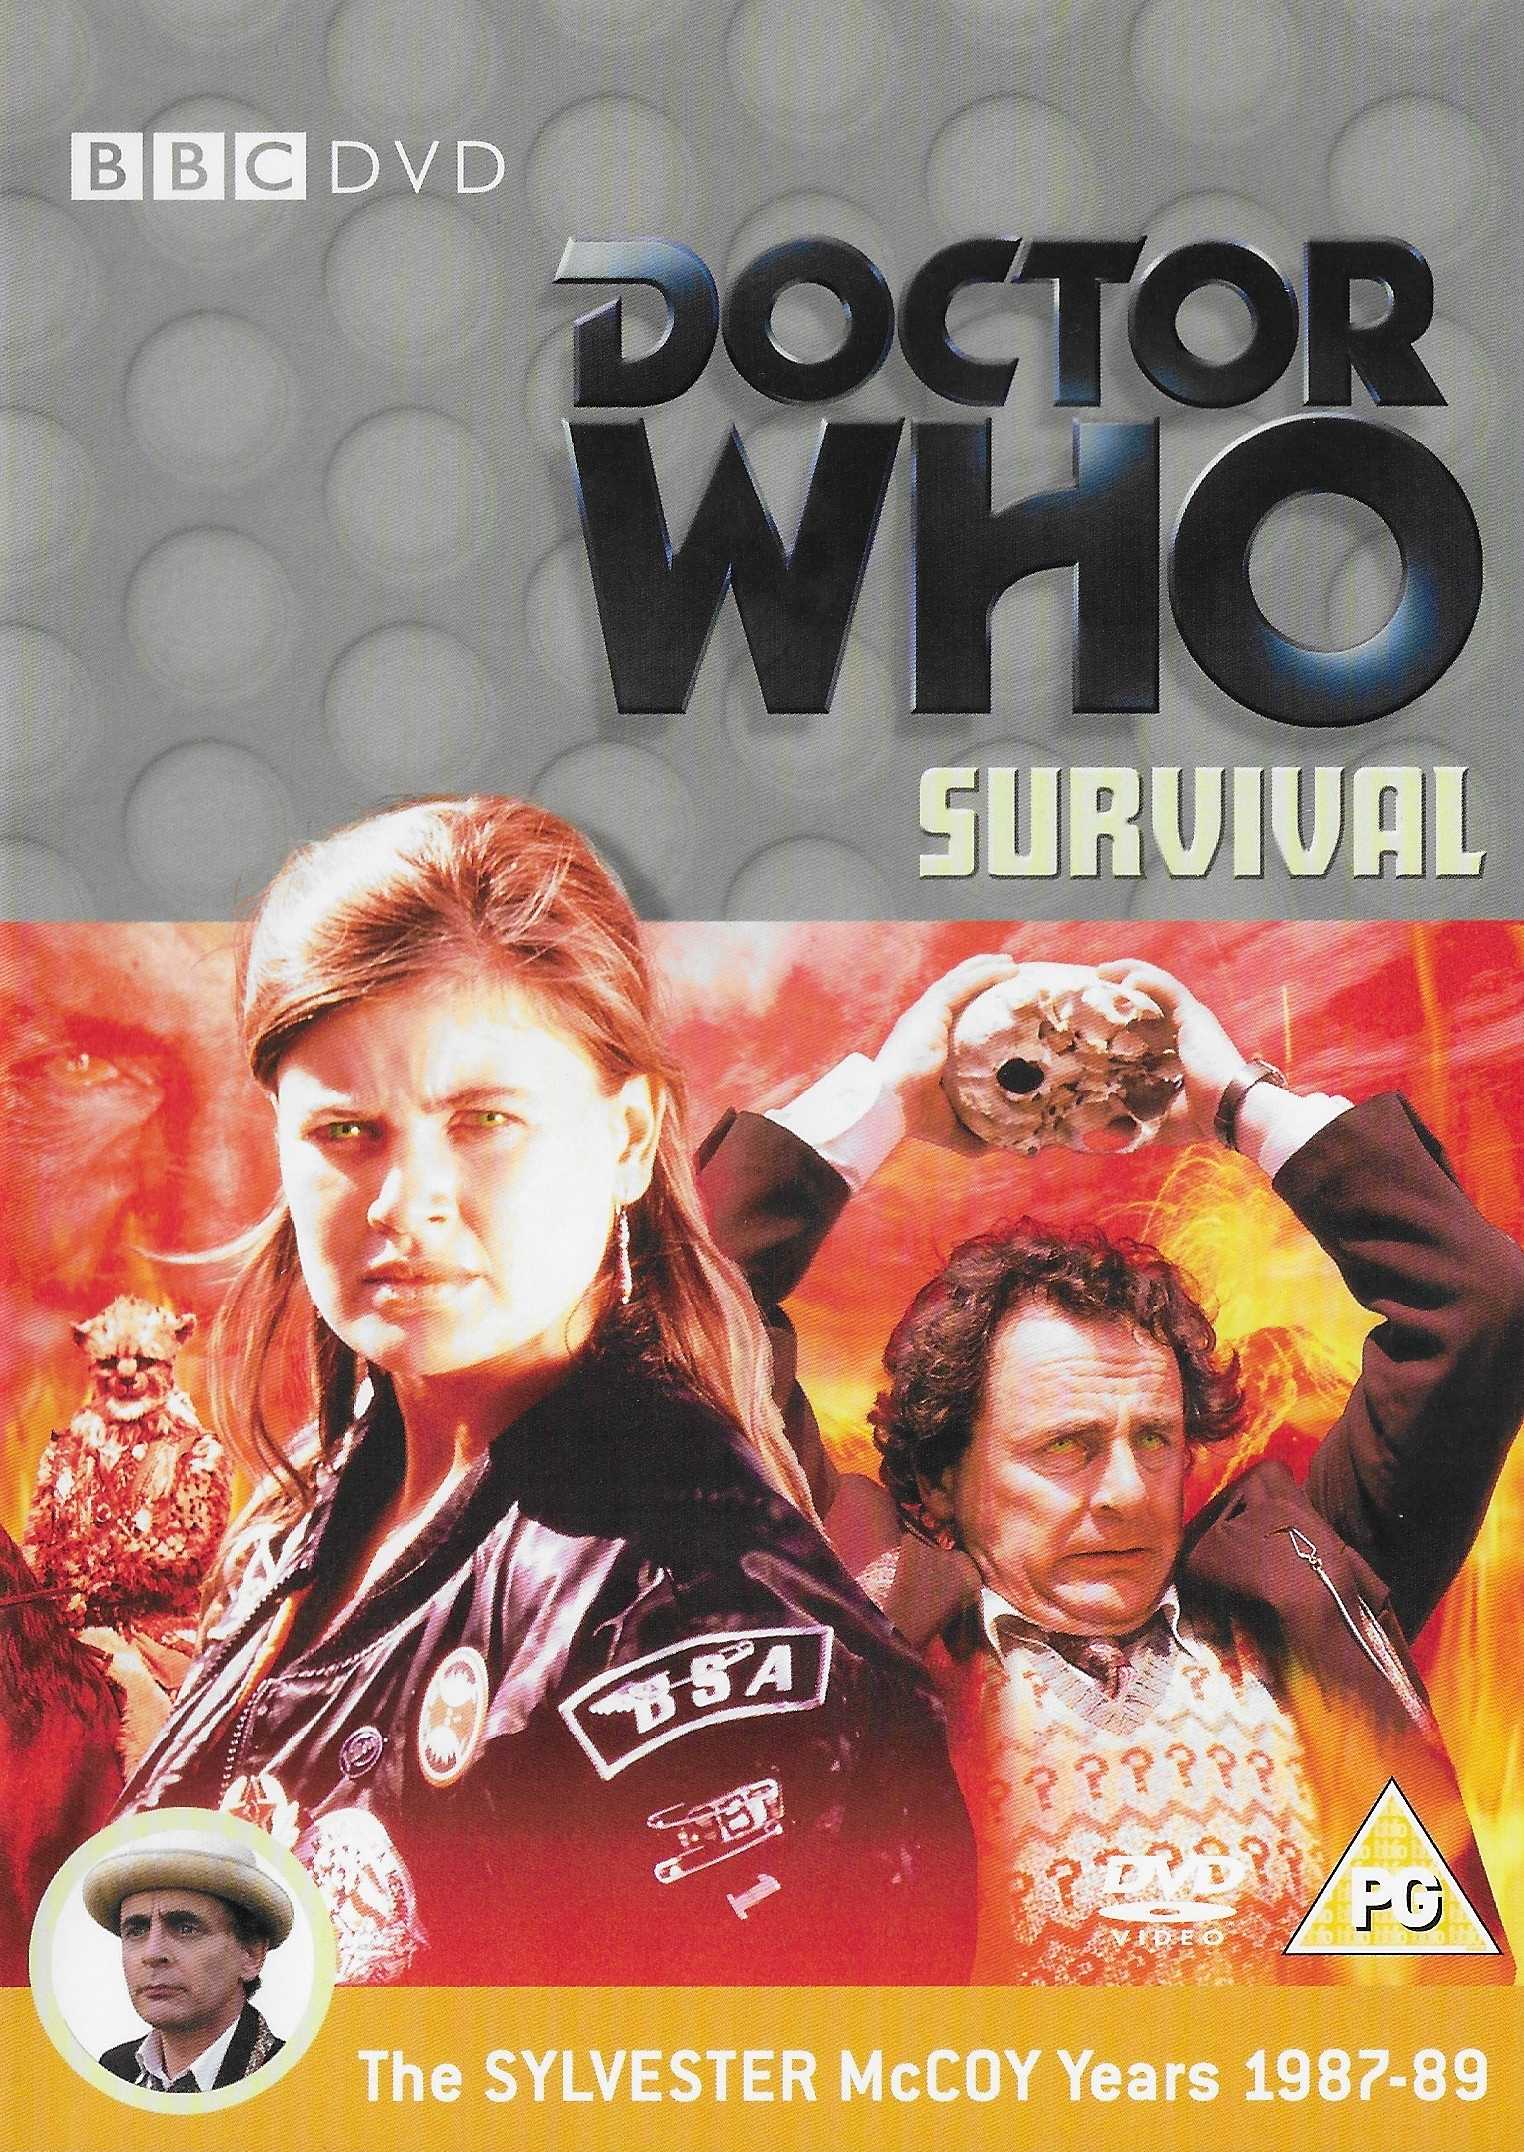 Picture of BBCDVD 1834 Doctor Who - Survival by artist Rona Munro from the BBC dvds - Records and Tapes library